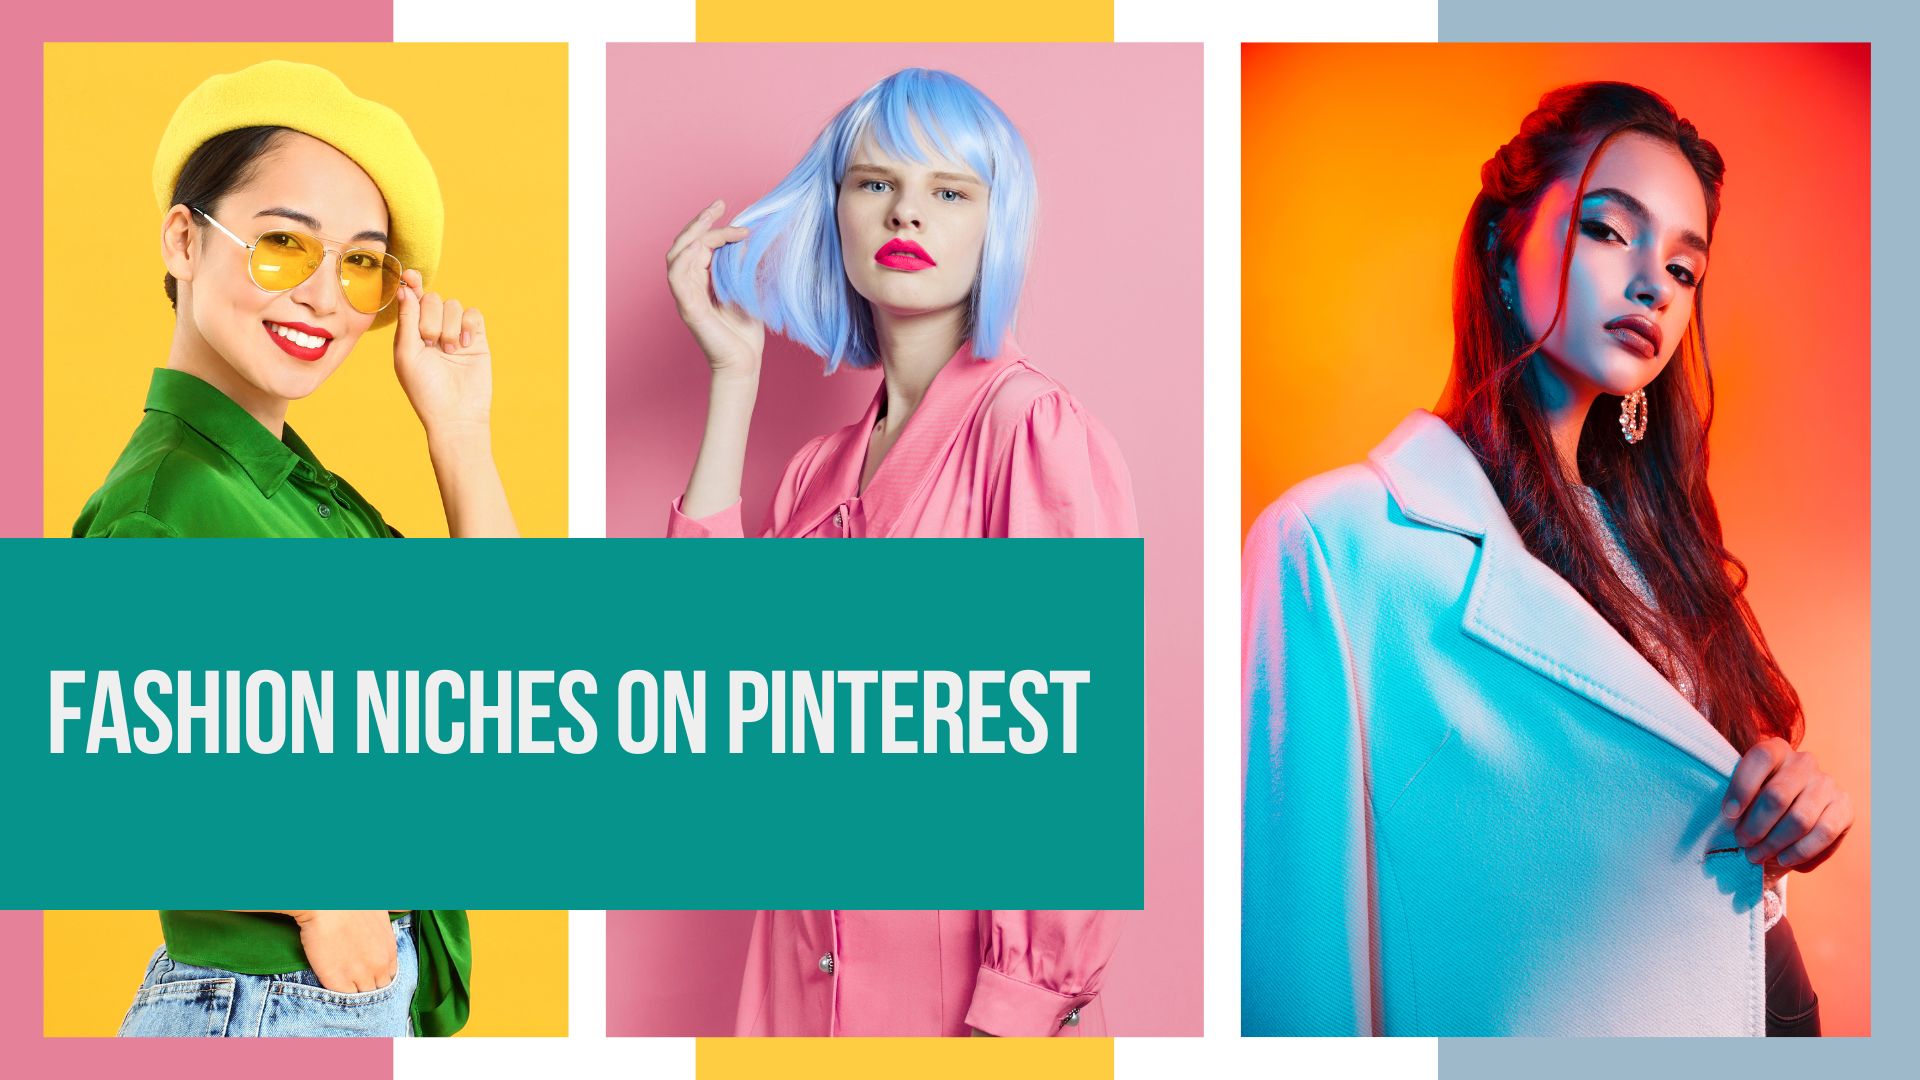 Discovering Lucrative Fashion Niches on Pinterest